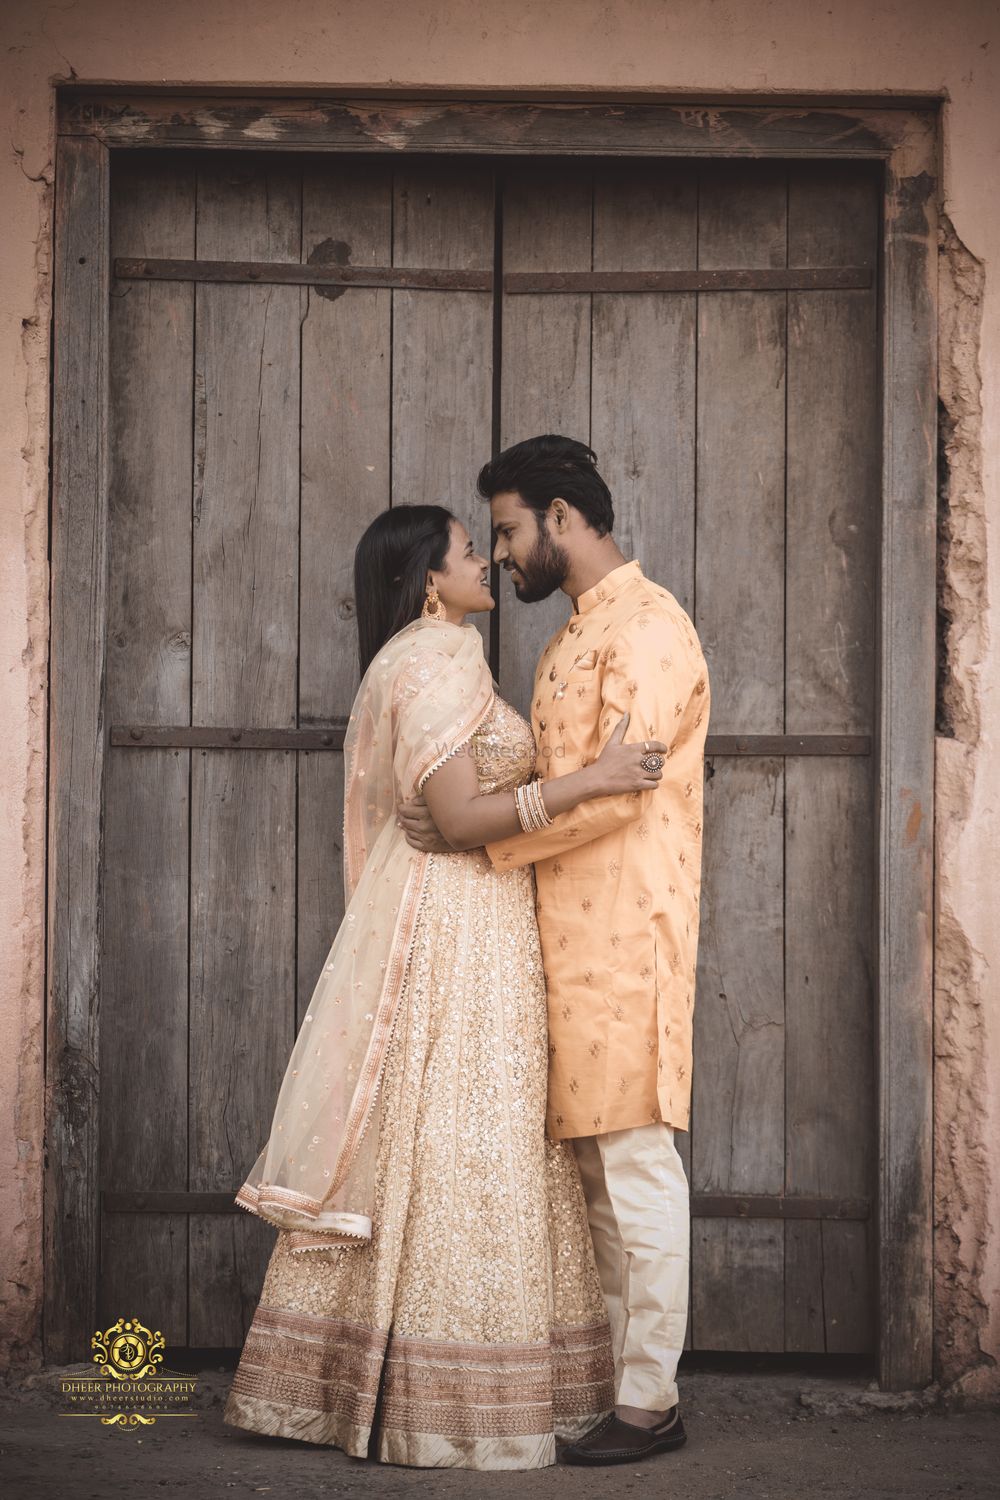 Photo From Surbhi & Kailash - By Dheer Photography